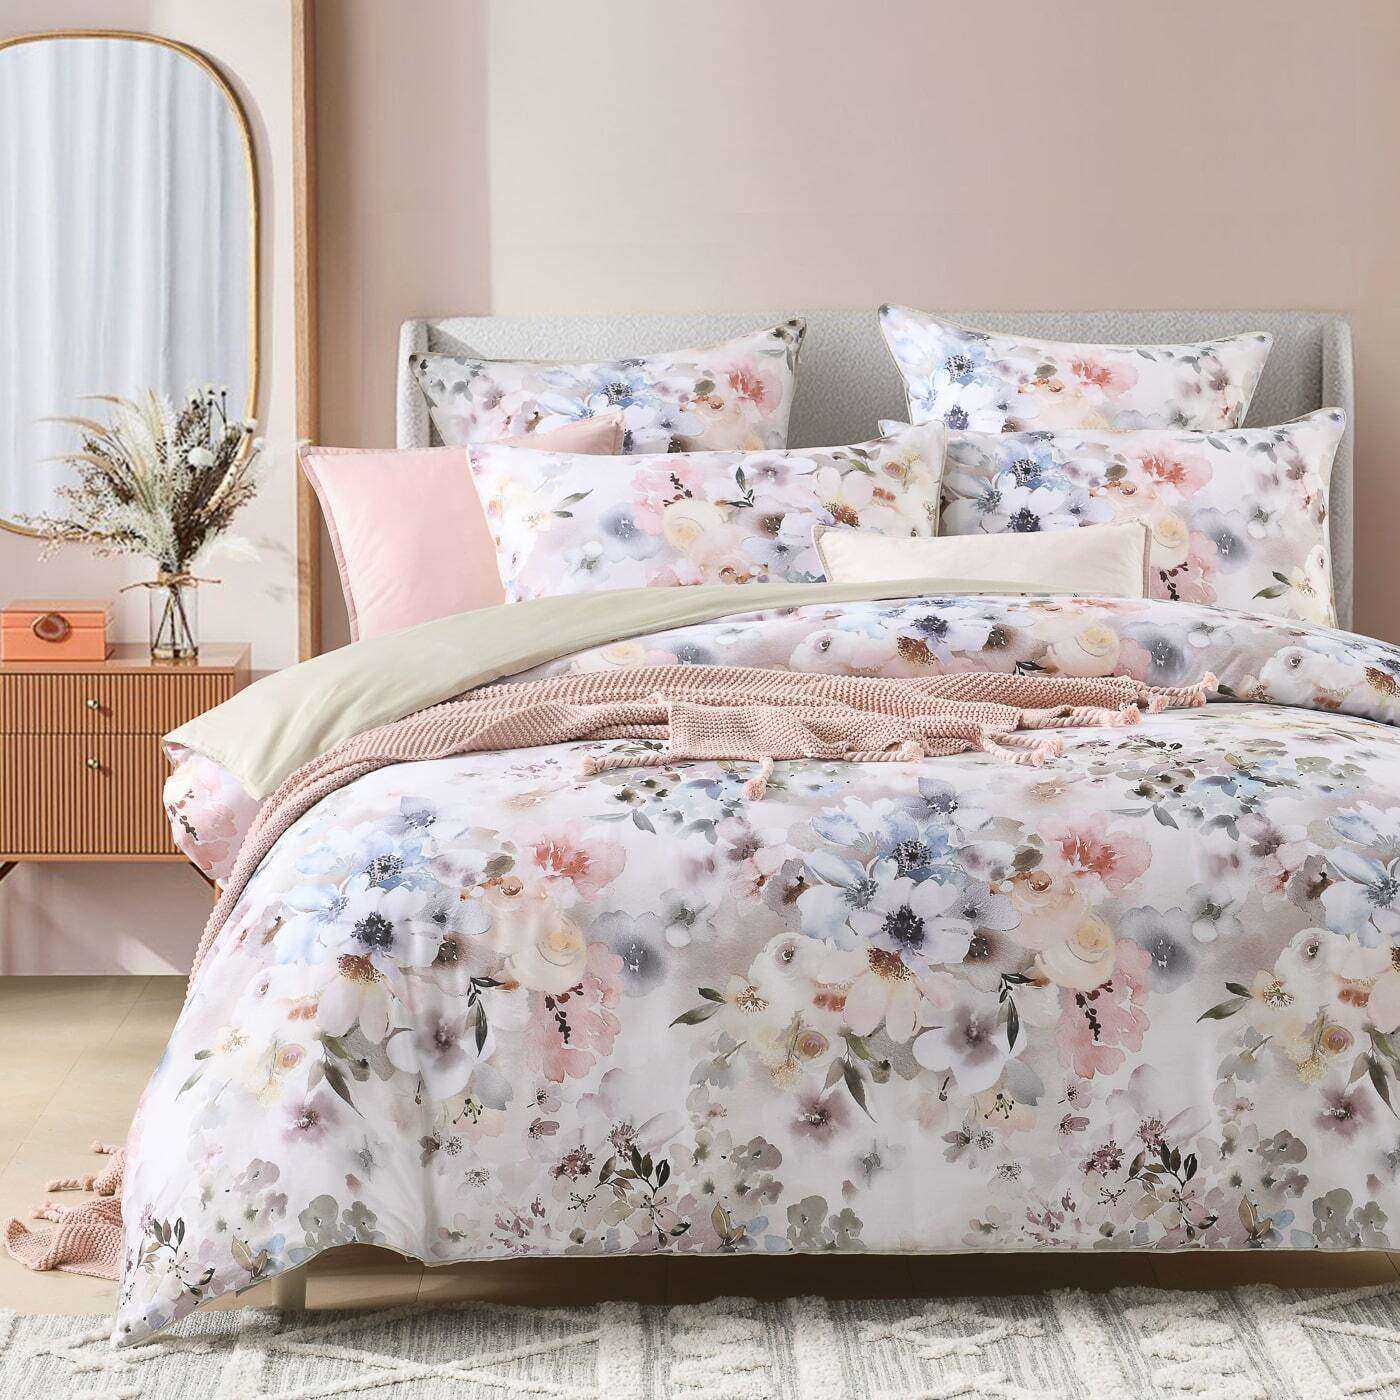 Quilt Covers & Quilt Cover Sets | Manchester Collection